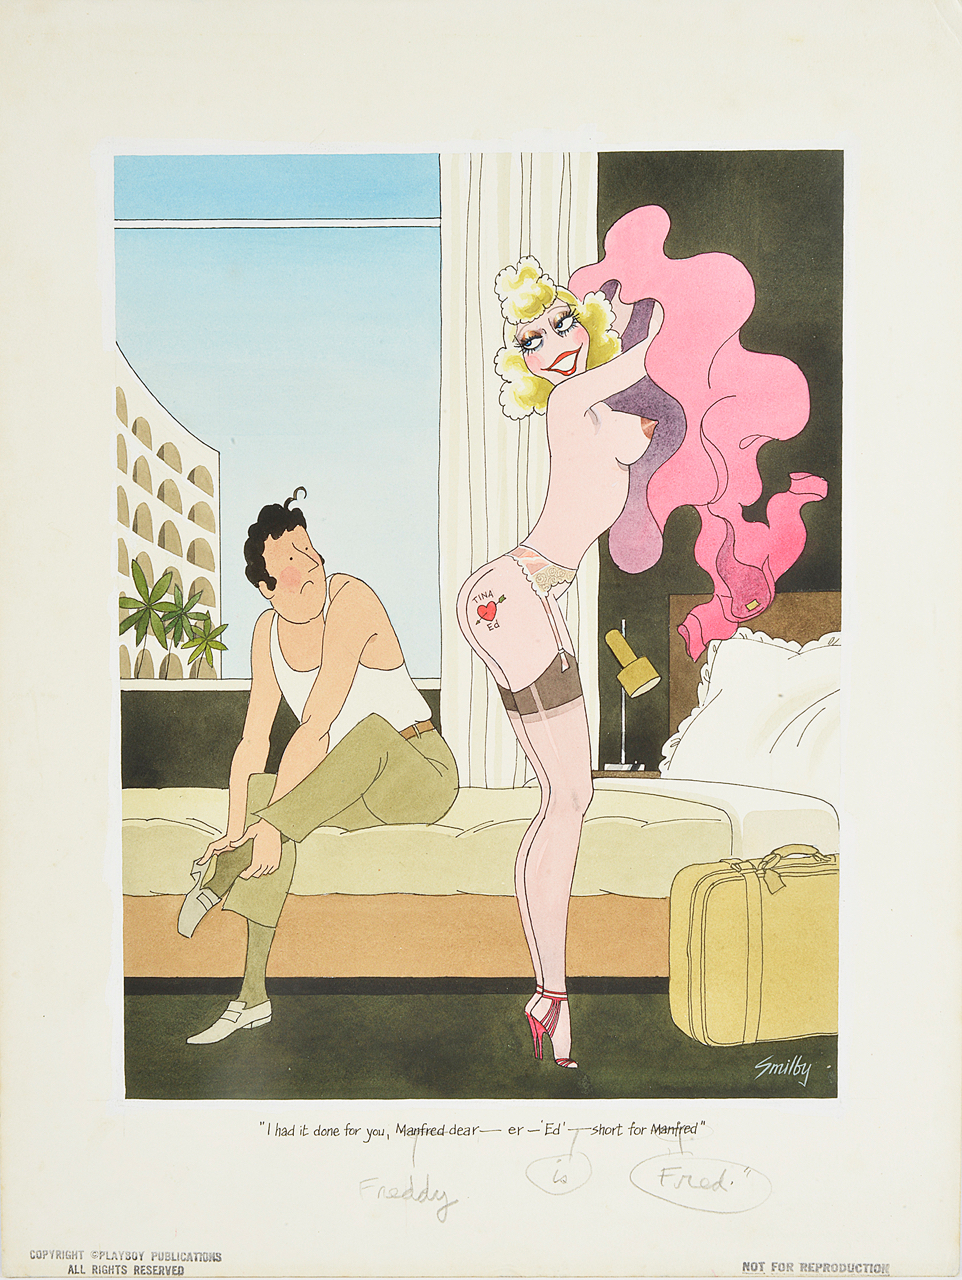 Smilby, Francis Wilford-Smith (British 1927 – 2009) cartoon for Playboy “I had it done for you..."